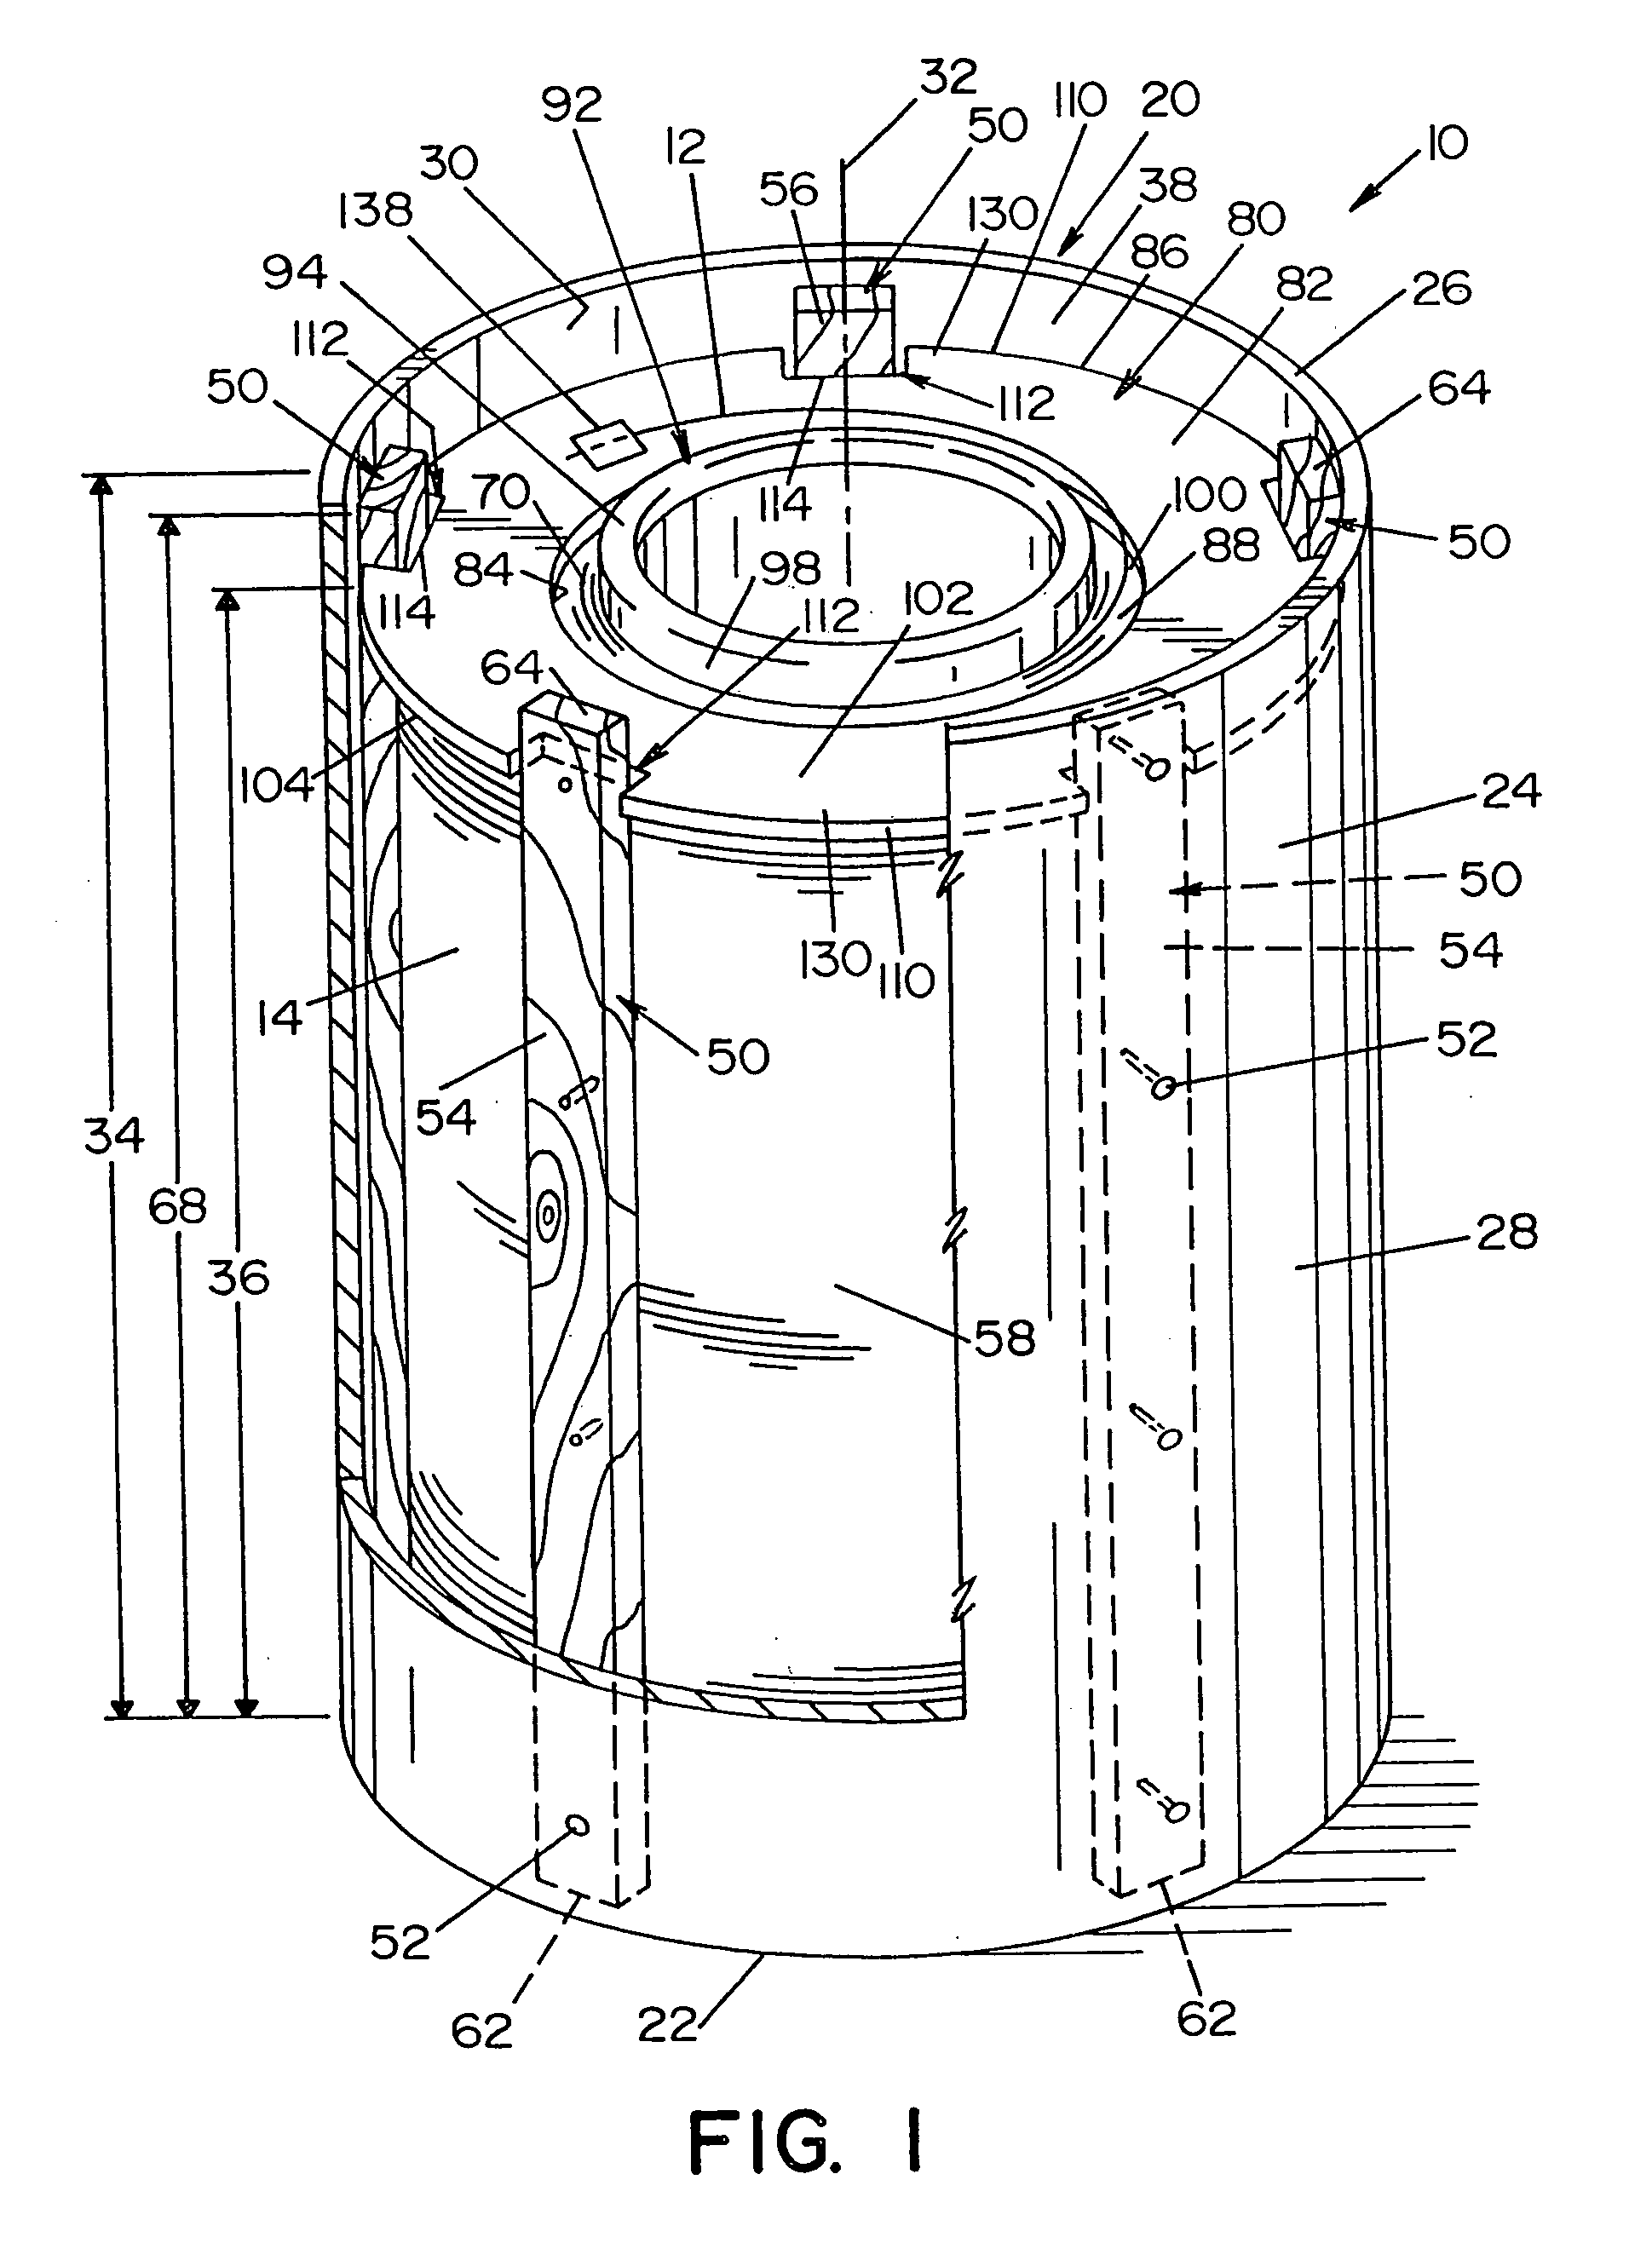 Welding wire container with ribbed walls and mating retainer ring